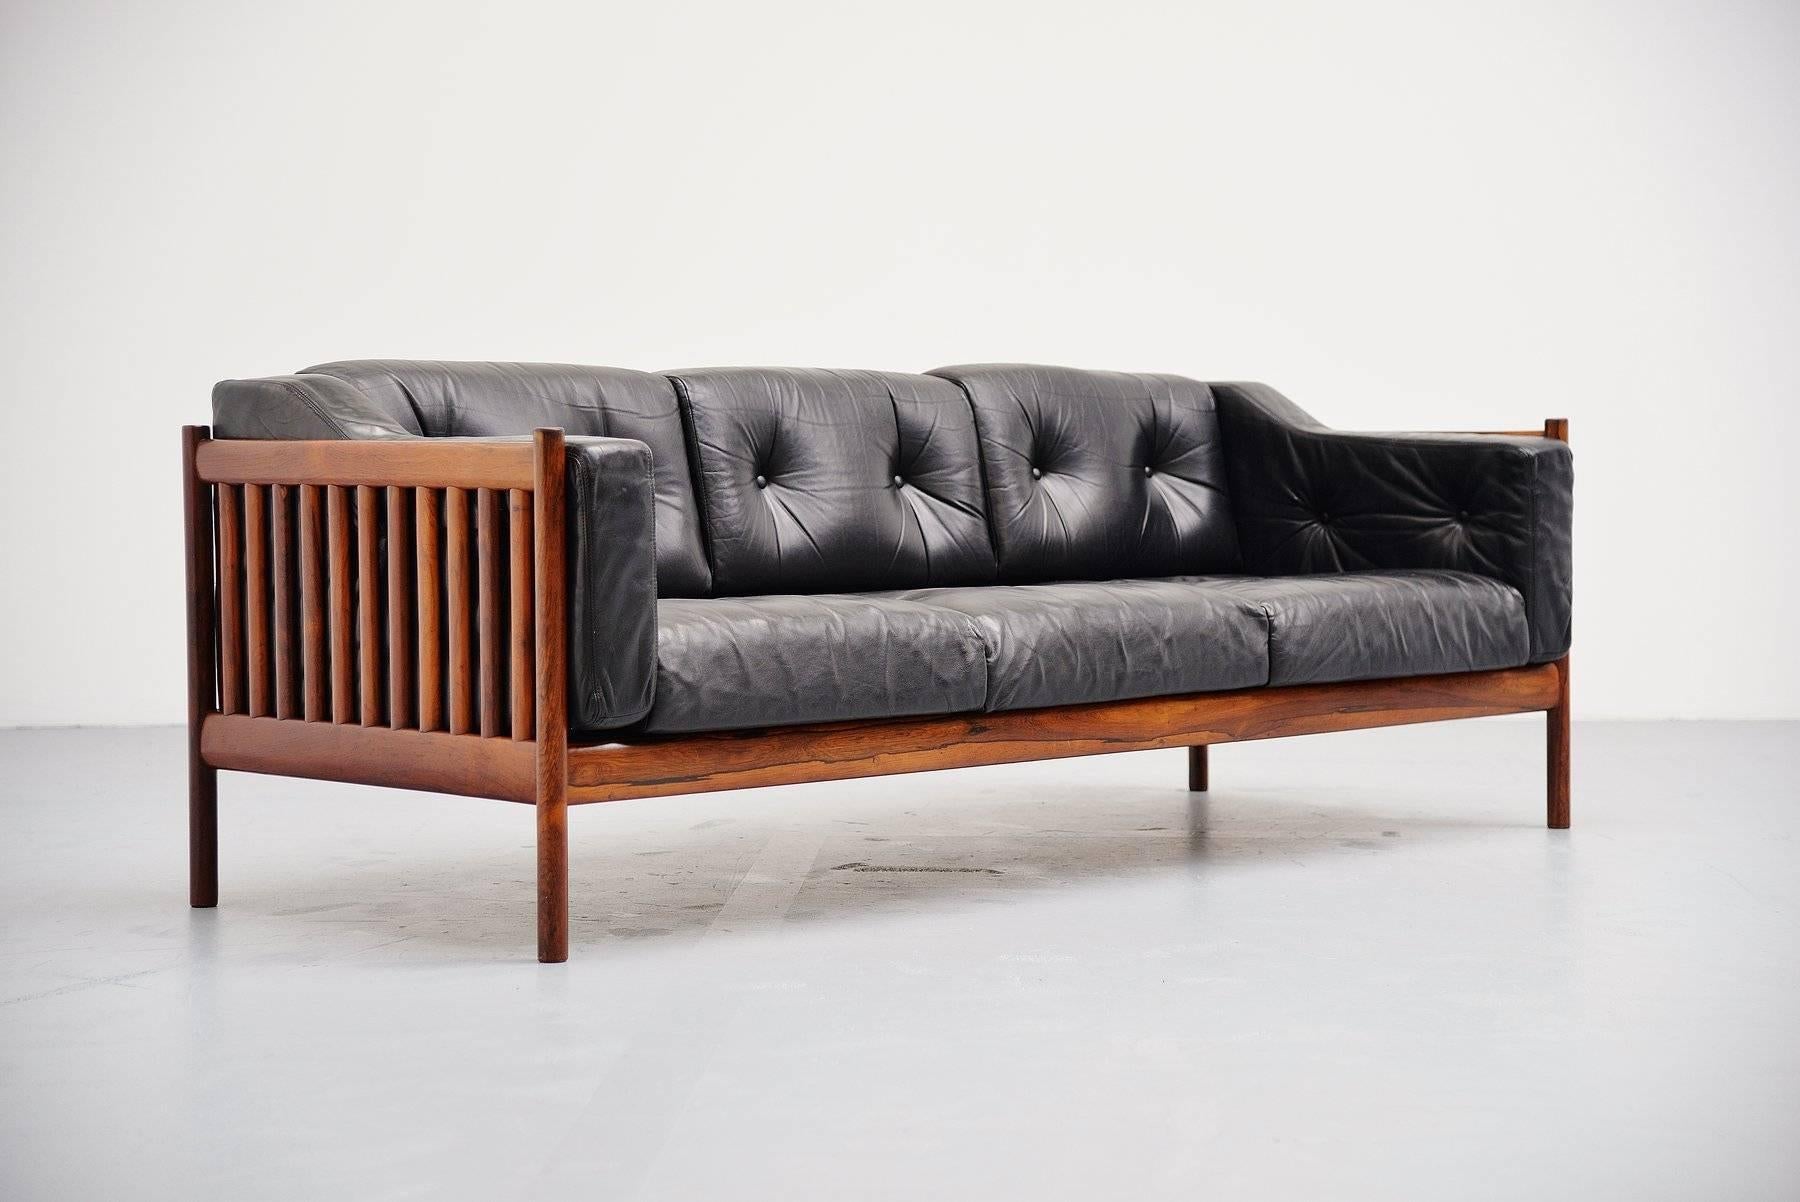 Very nice solid rosewood and black leather lounge sofa made in Denmark, 1960. This sofa has a solid rosewood frame with rosewood spines all round which looks very nice in contrast with the black leather. The black leather cushions are made of high